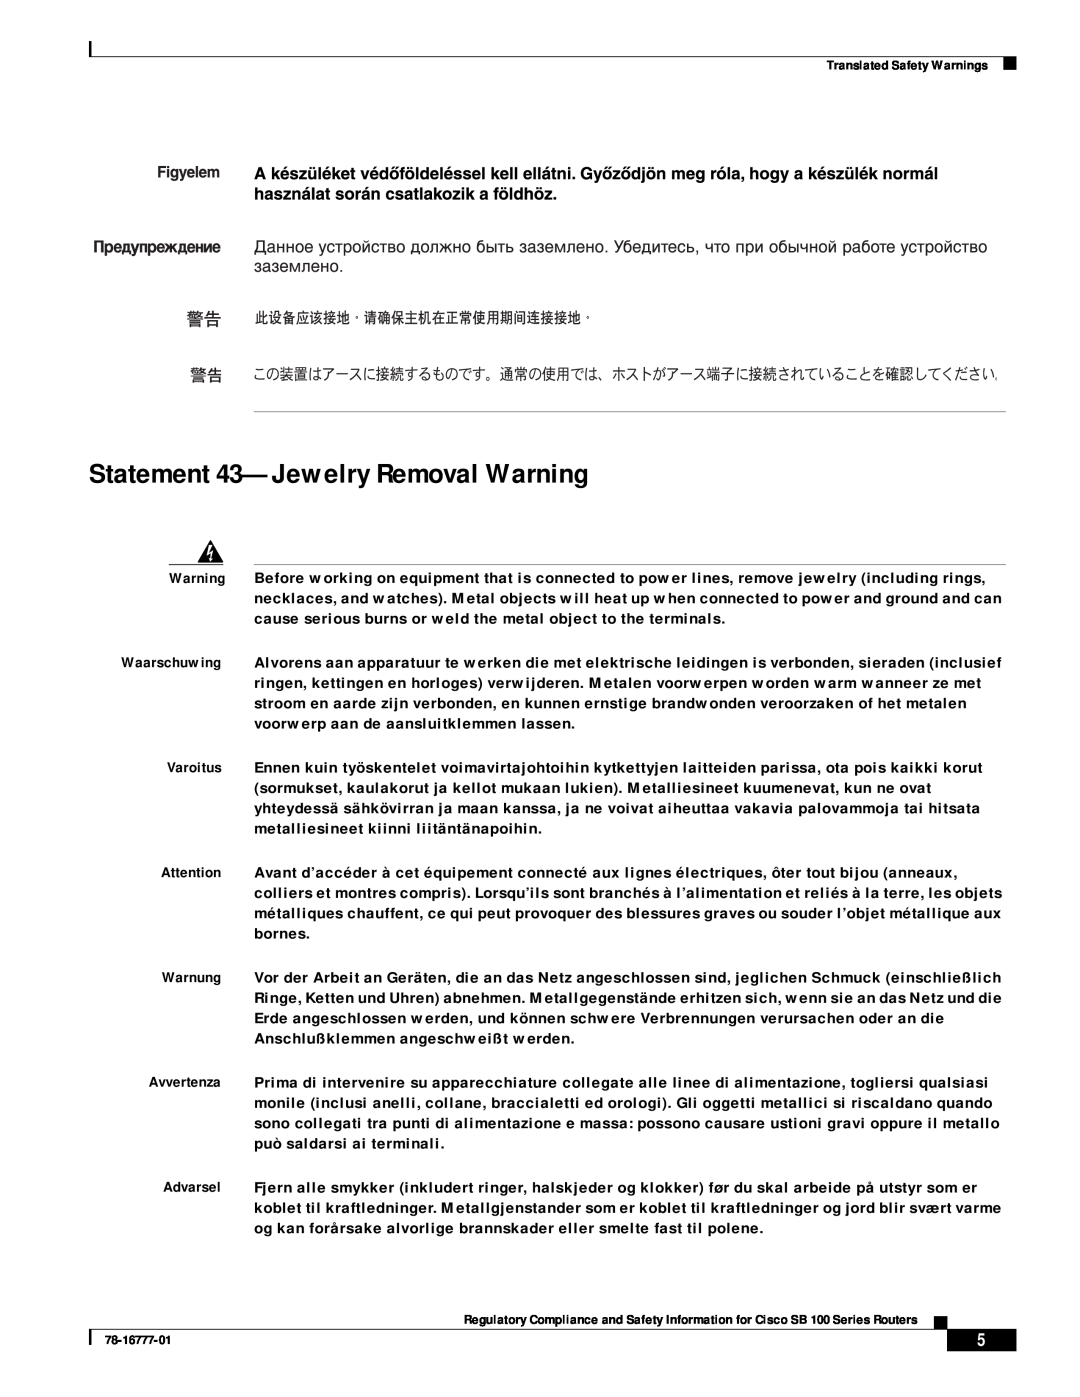 Cisco Systems SB 100 Series manual Statement 43-Jewelry Removal Warning 